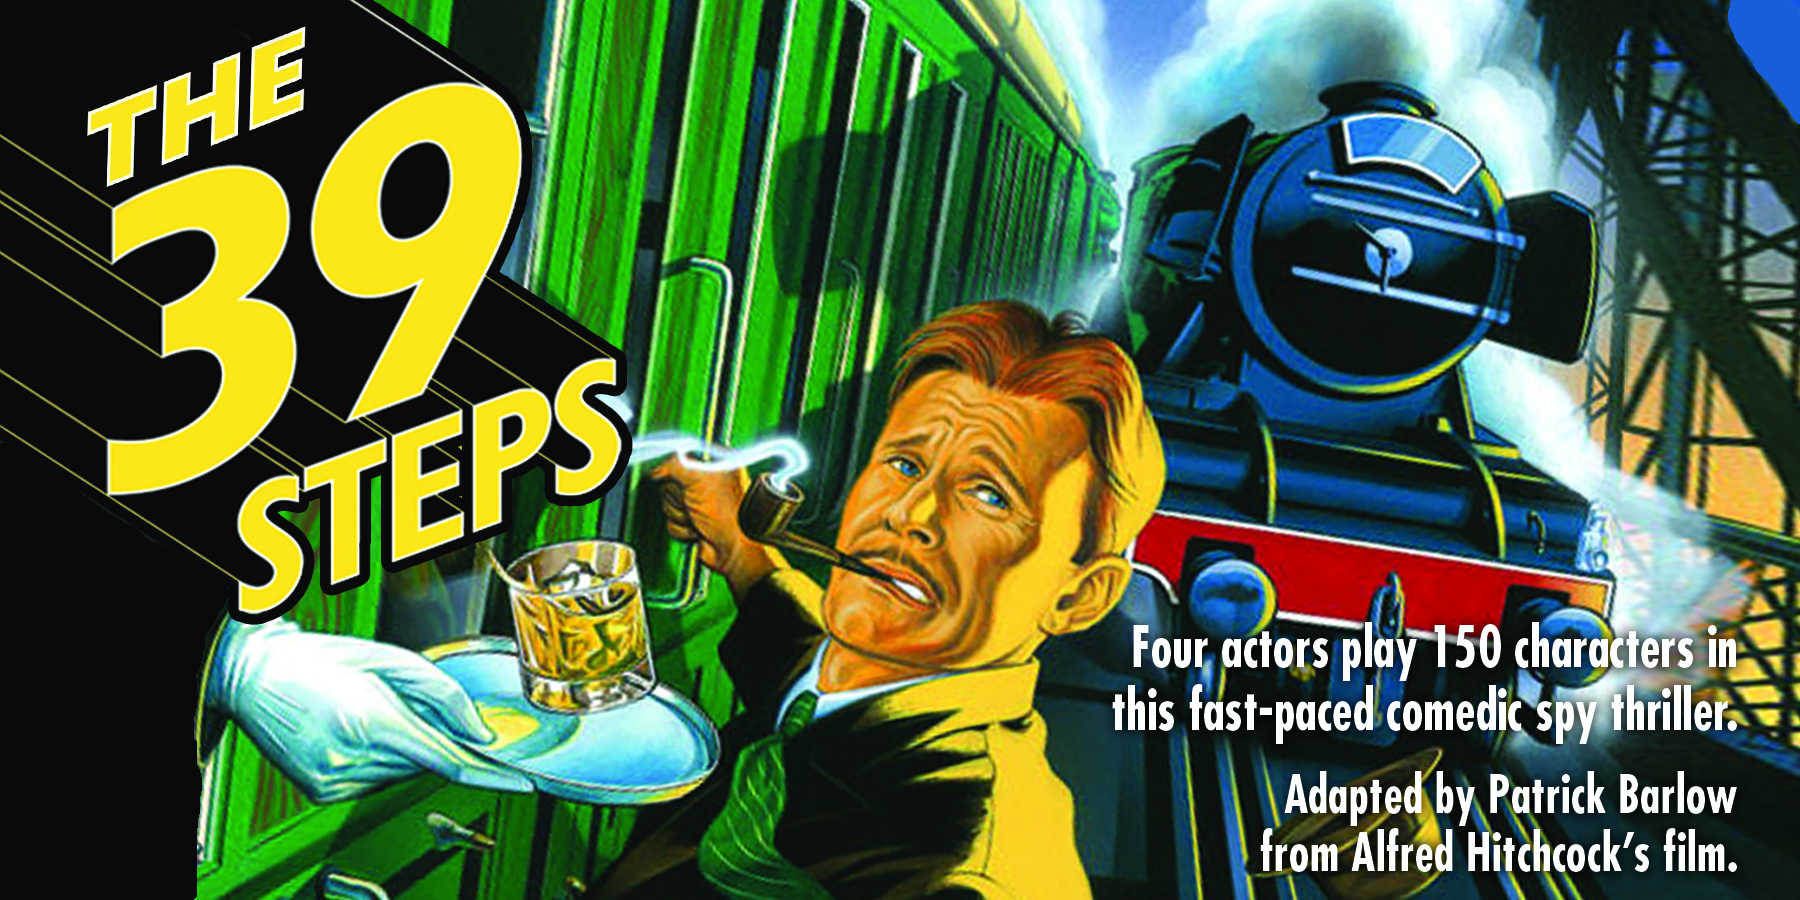 43-facts-about-the-movie-the-39-steps